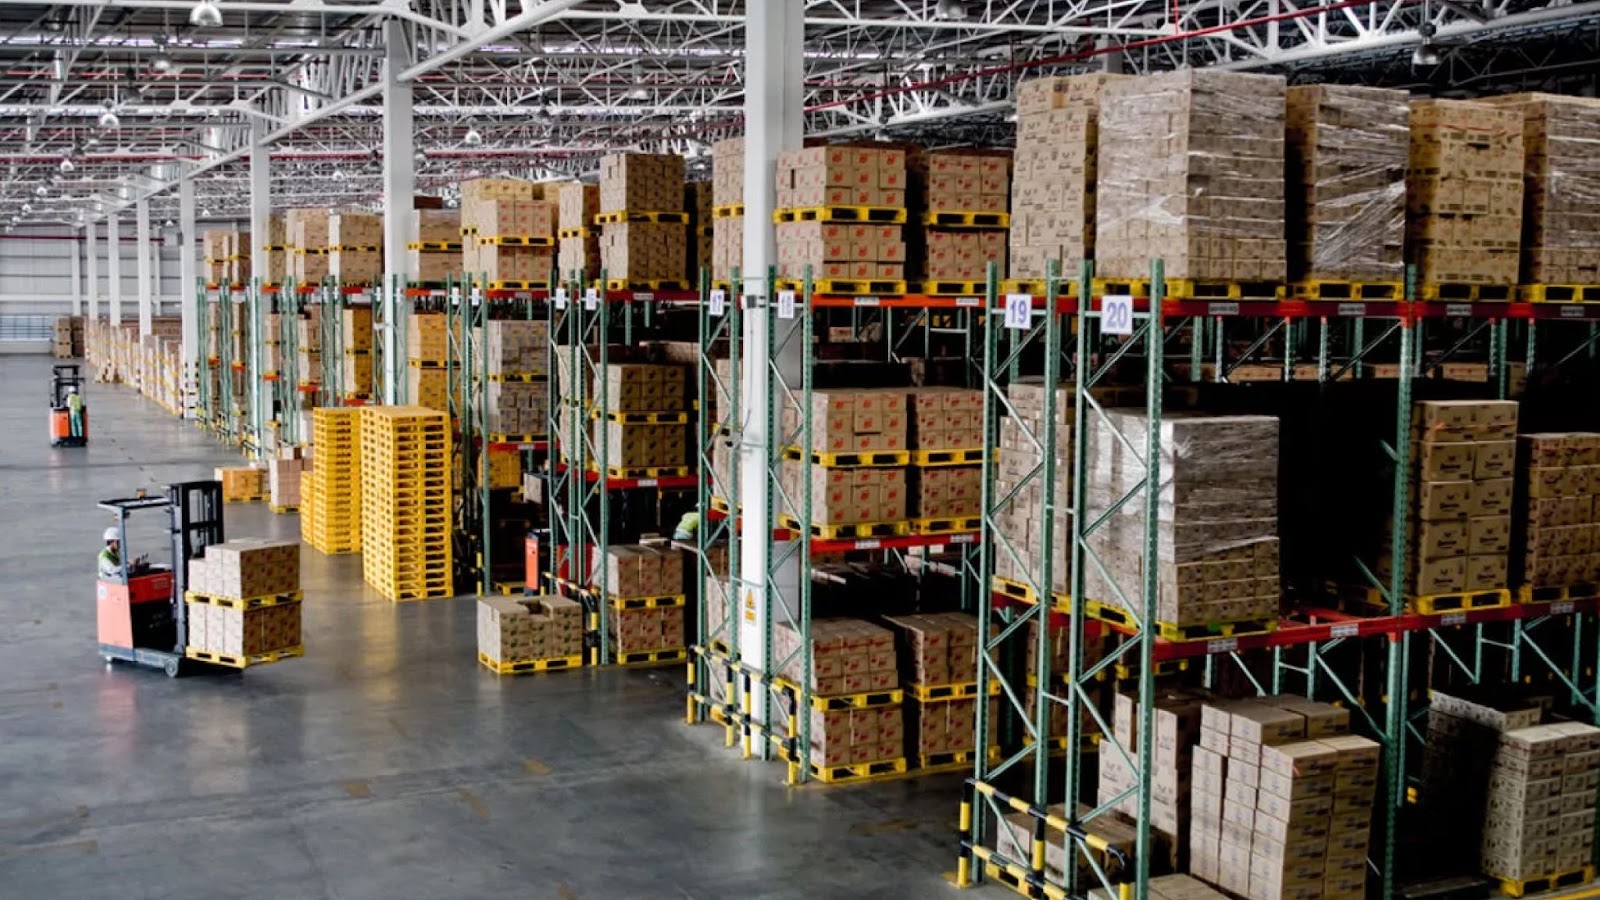 Here Is A Photo Of Fba Warehouse